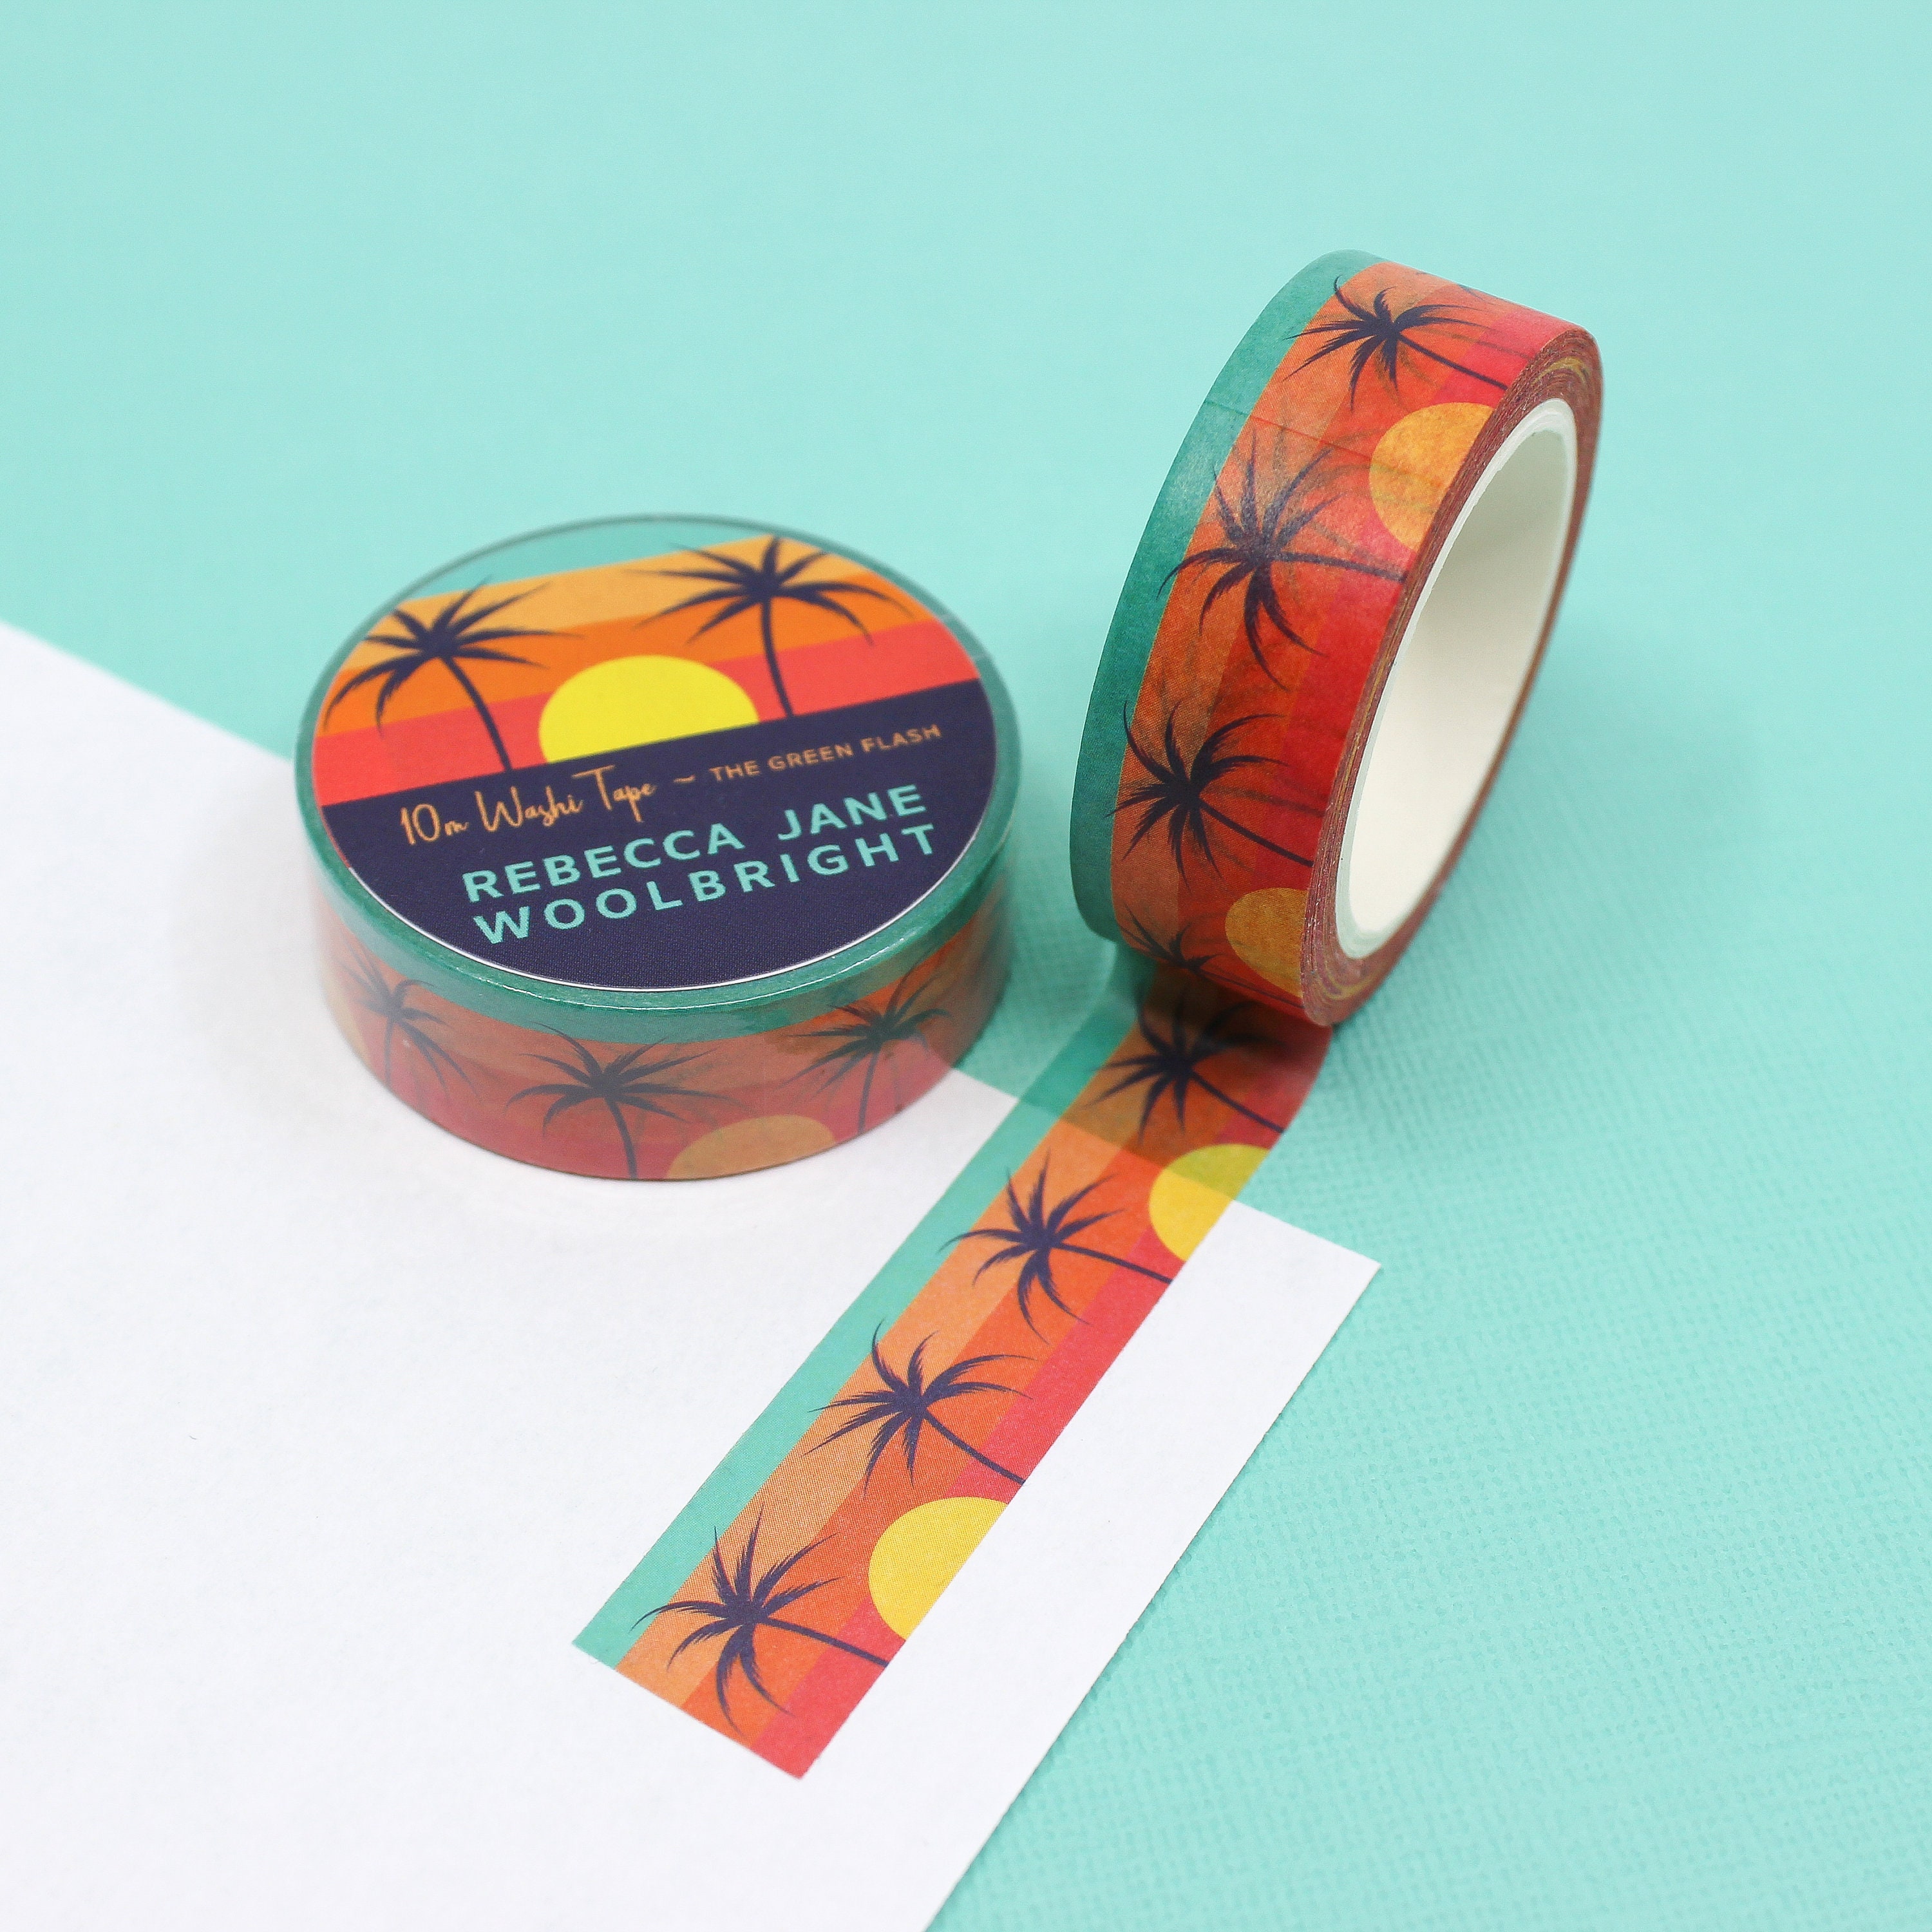 Winter Tree Foil Washi Tape - Paper Tape Great for Scrapbooking